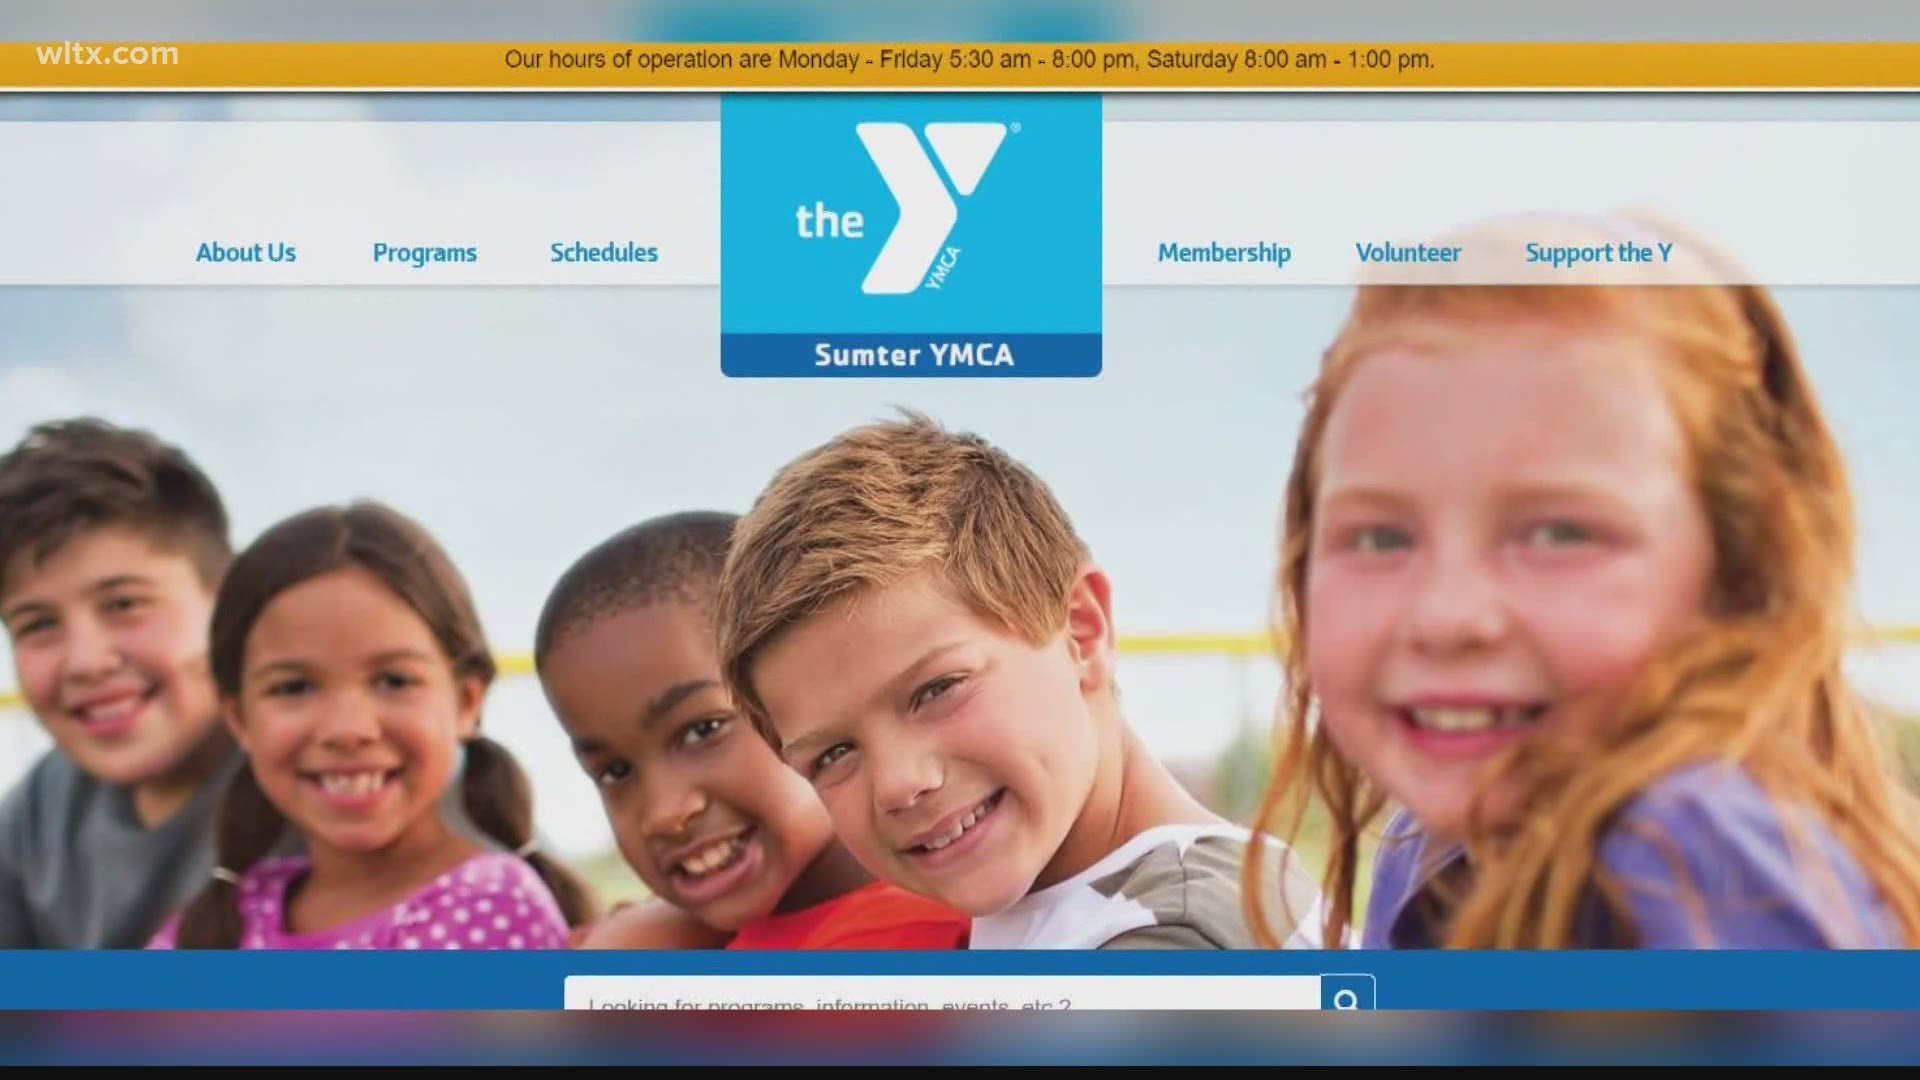 Kindergarten through 8th grade students can bring school work to the YMCA and attend their classes